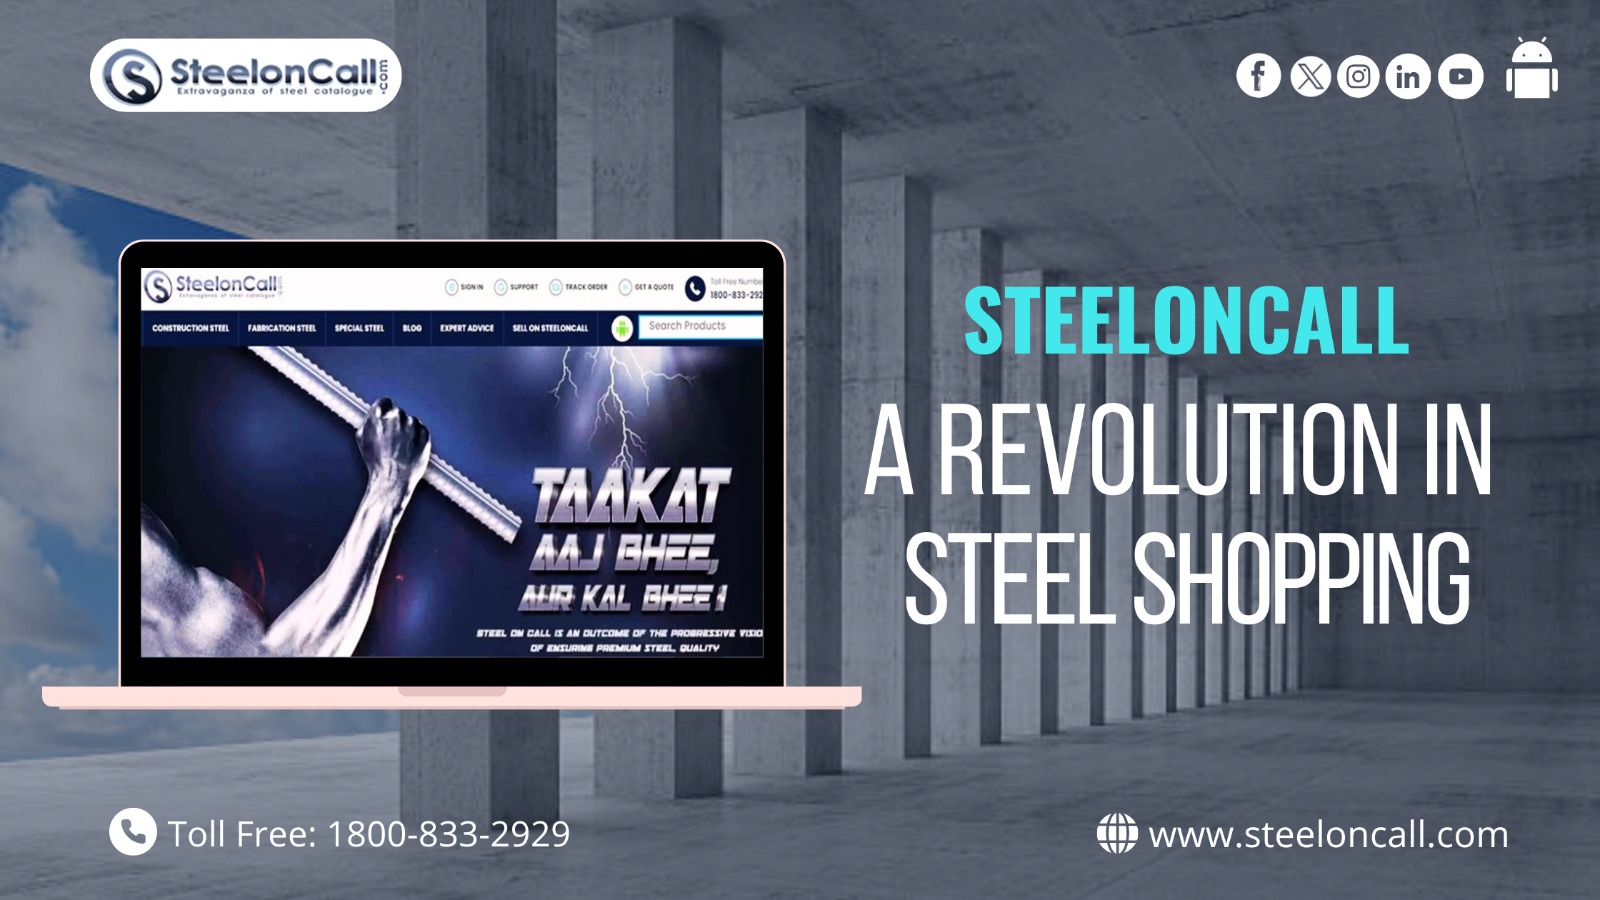 Steeloncall - A Revolution in Steel Shopping